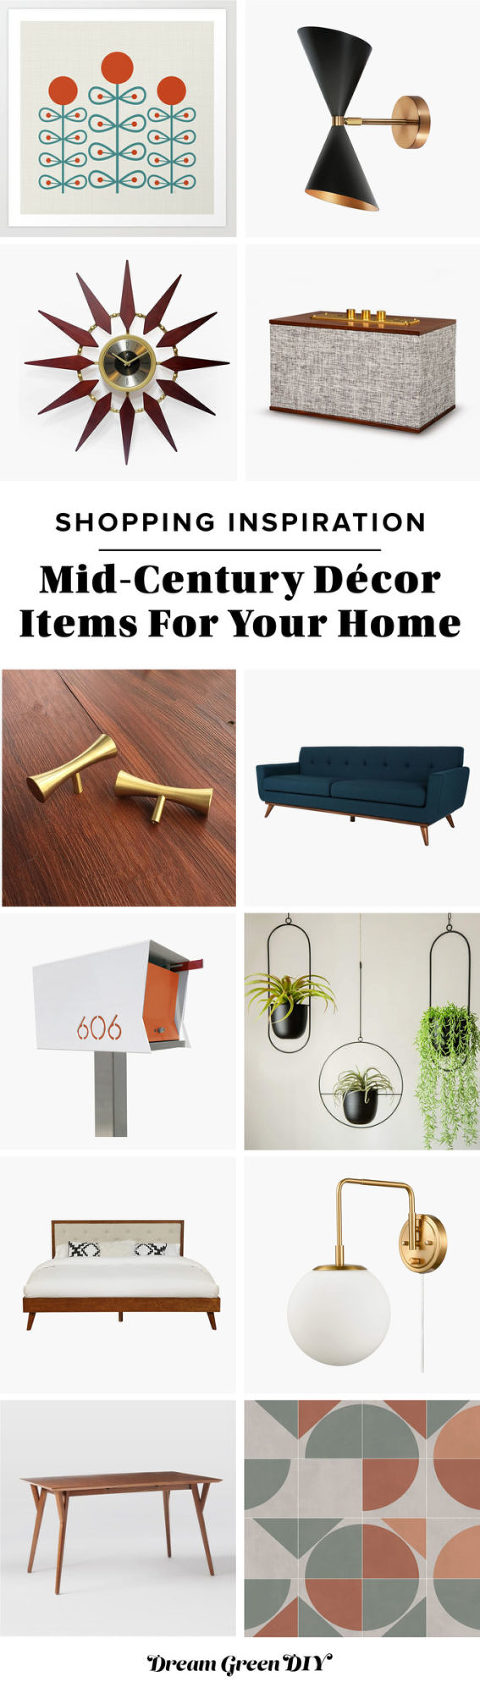 12 Mid-Century Décor Items For Your Home